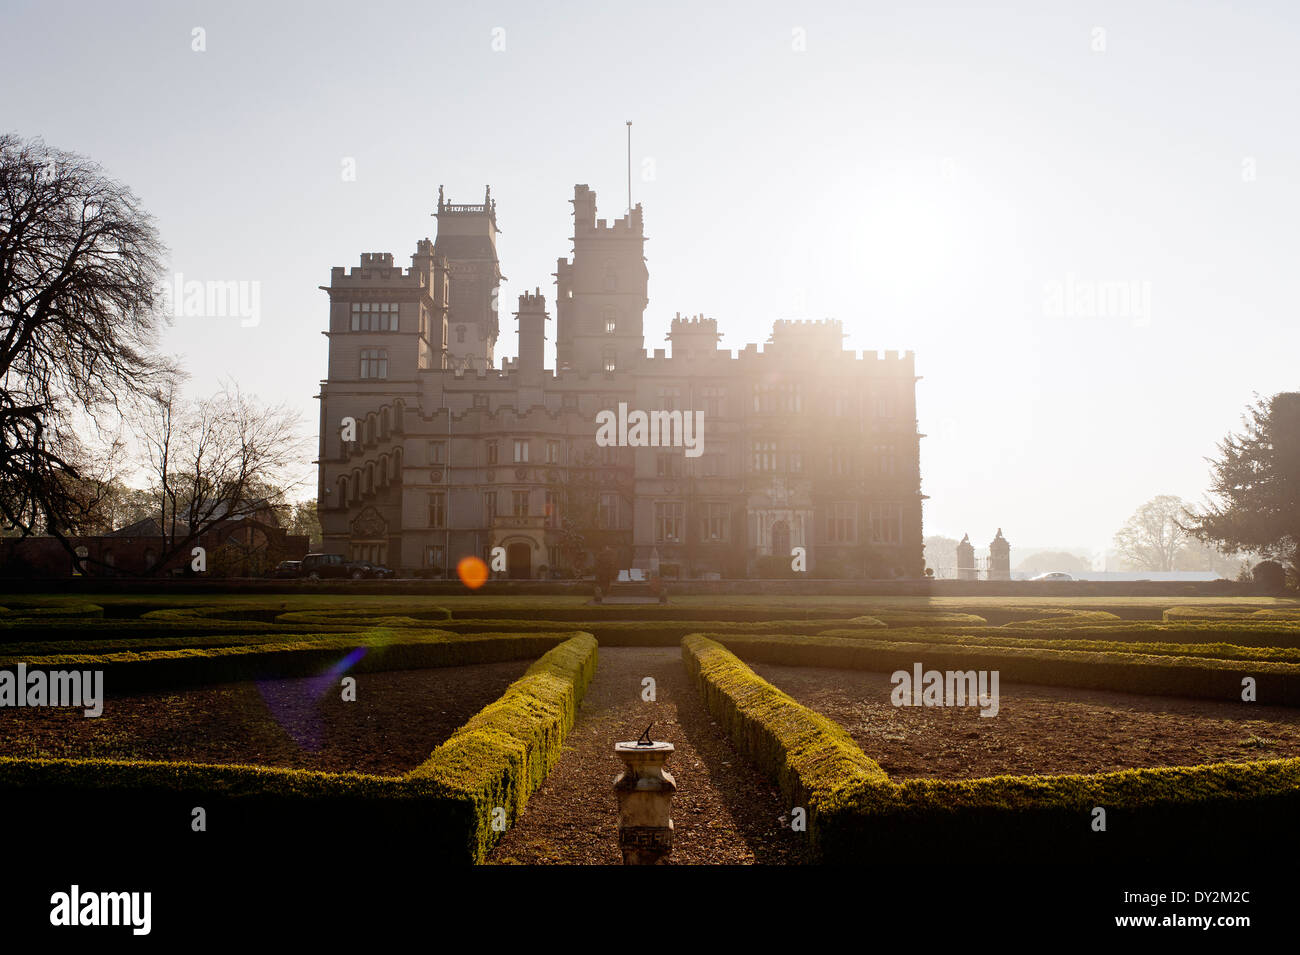 Exterior facade of the imposing Carlton Towers at sunset, a 15th century stately home Stock Photo